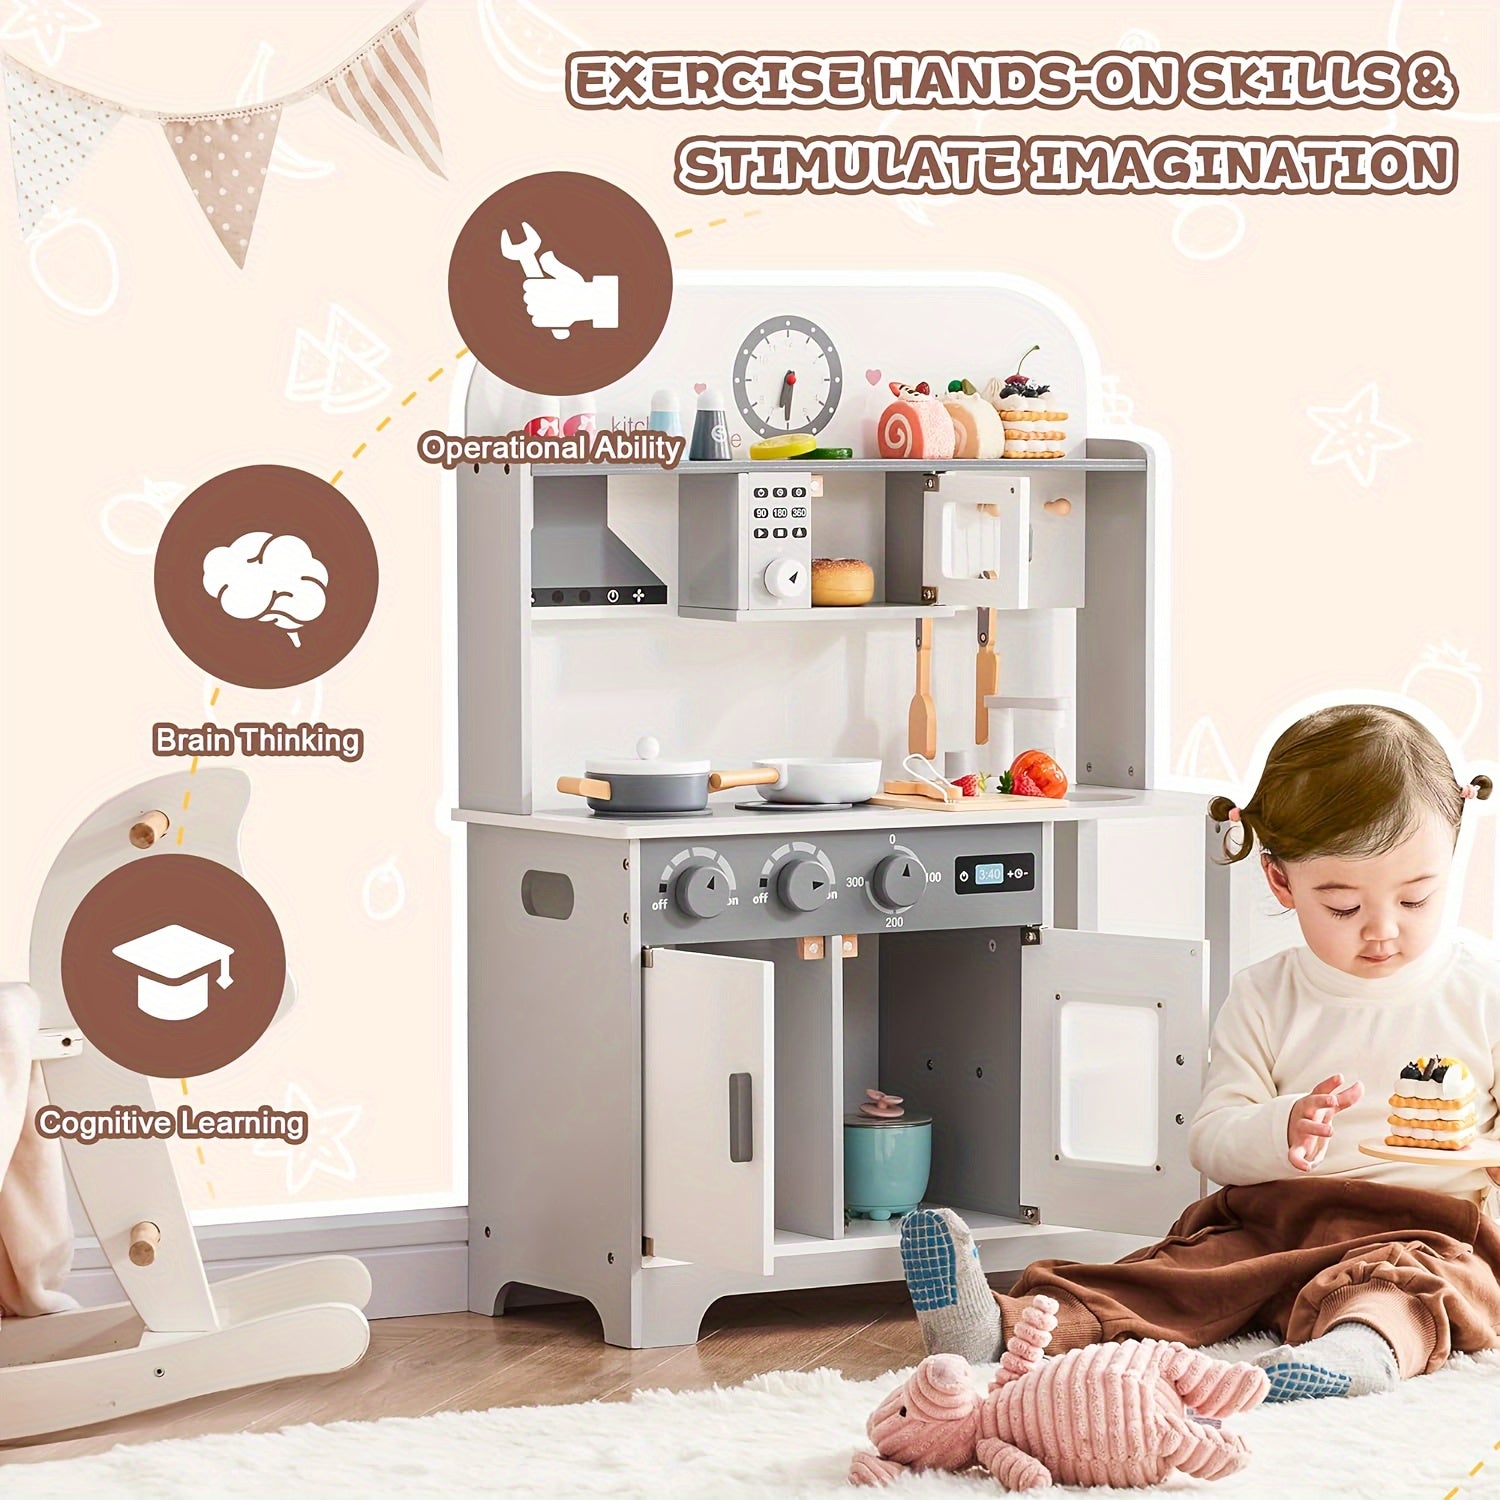 Wooden Kitchen Set, Kitchen Toy Set, Chef Simulated Kitchen With Play Function, Toy Kitchen With Toy Food And Cookware Accessories, Gift Toy (Random Mode)